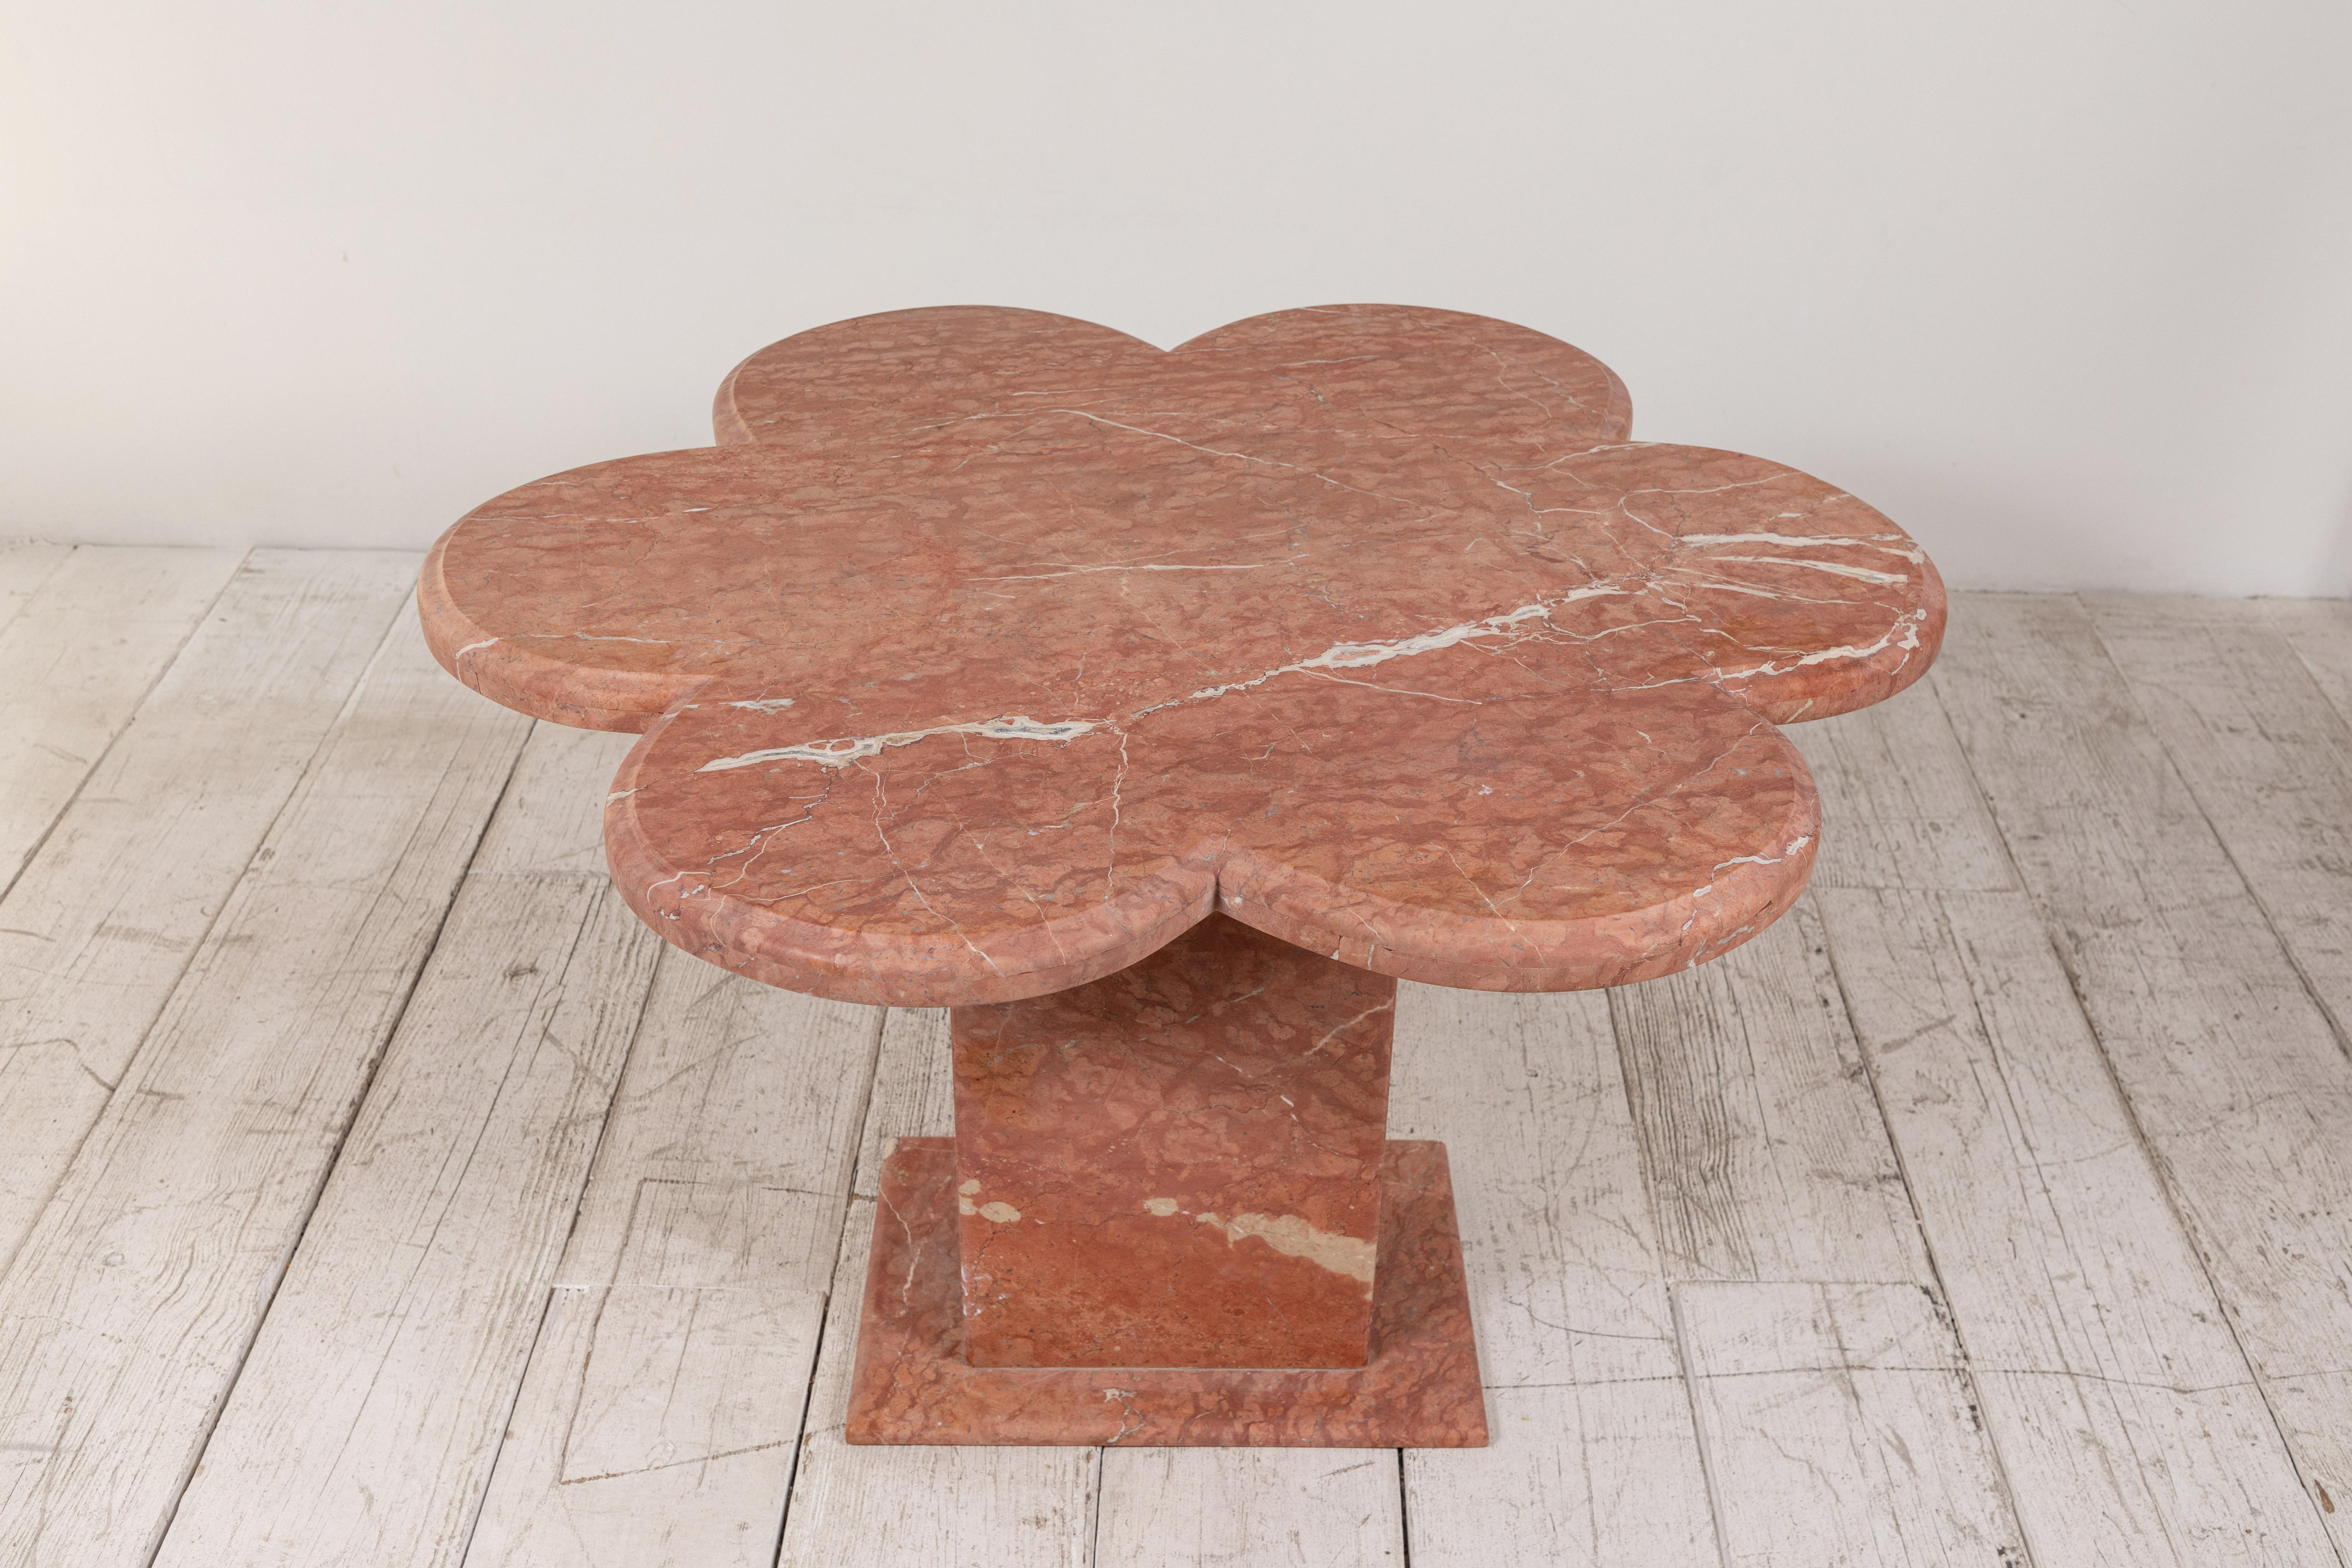 Honed matte quartz scalloped side table sitting on a square pedestal base. The table is fun and whimsical.